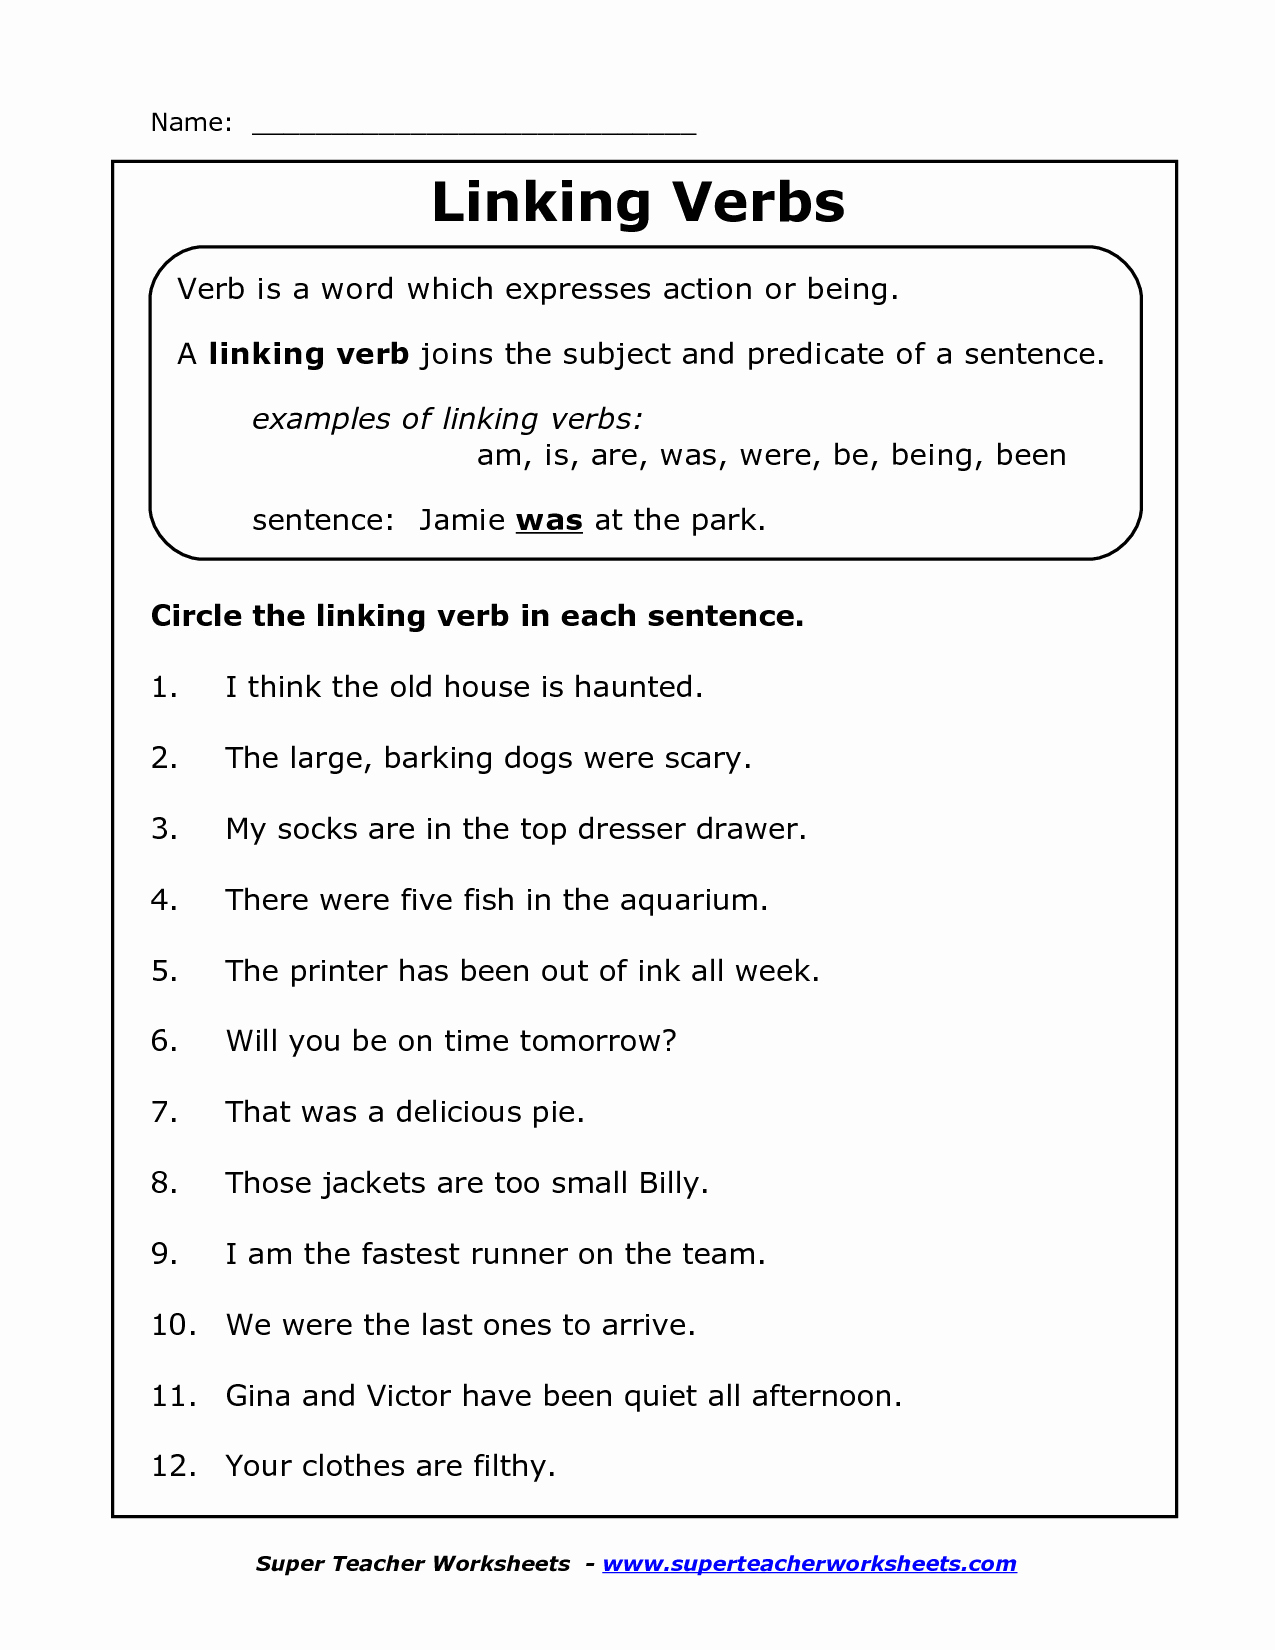 Linking and Helping Verbs Worksheet Lovely 17 Best Of Linking Verbs Worksheet Grade 1